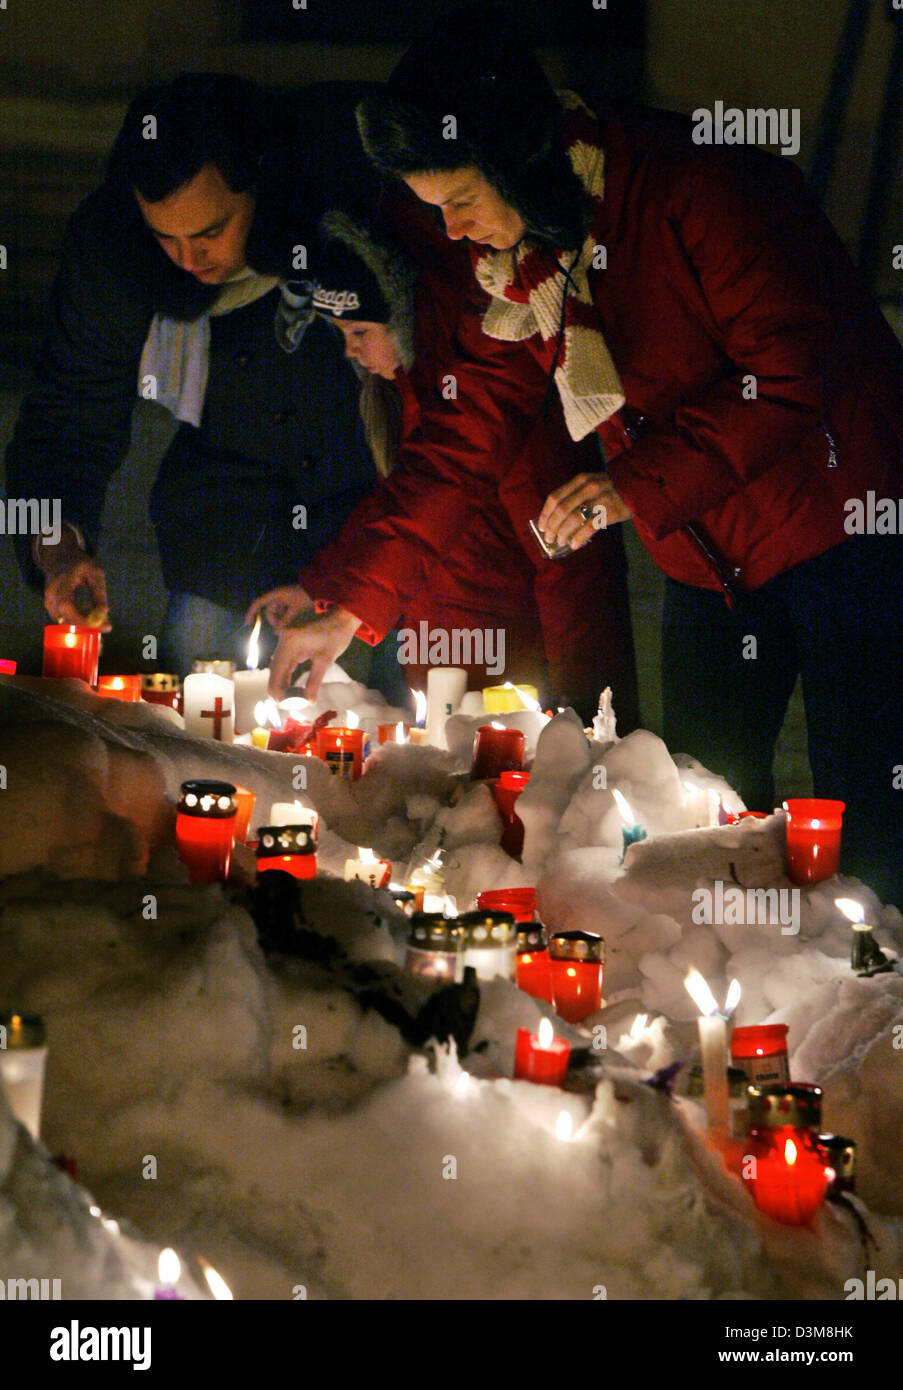 (dpa) - Local residents lit torches as they mourn the victims of the collapsed skating rink on the town hall square of Bad Reichenhall, Germany, Tuesday, 03 January 2006. The number of dead has increased to twelve people  after the roof of the skating rink caved in under the pressure of heavy snow on Monday, 02 January. Three more people were located underneath the debris but their Stock Photo